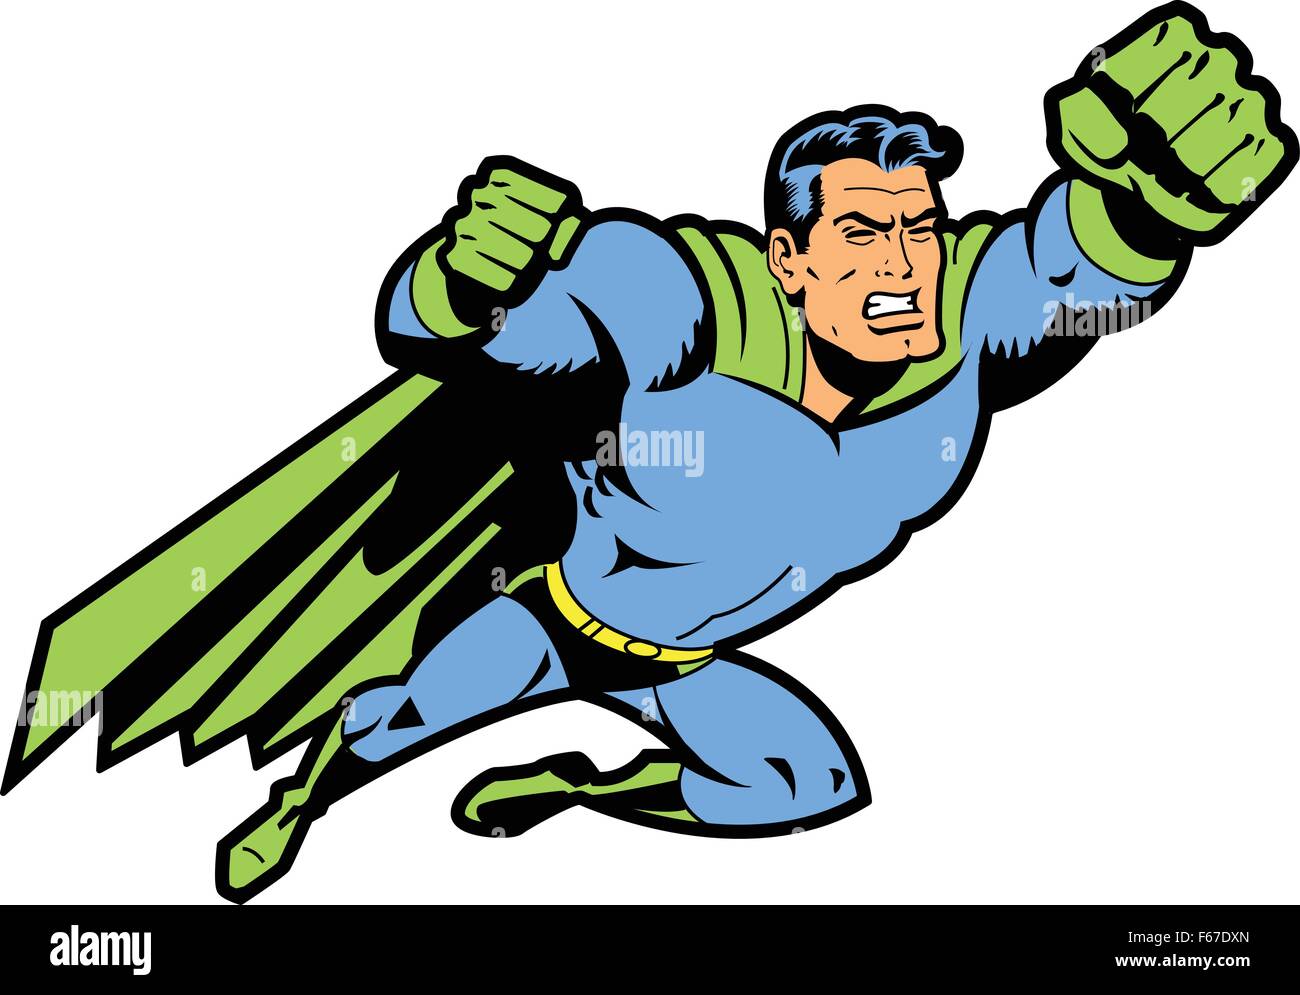 Flying Classic Retro Superhero With Clenched Teeth and Fist Ready To Fight Stock Vector